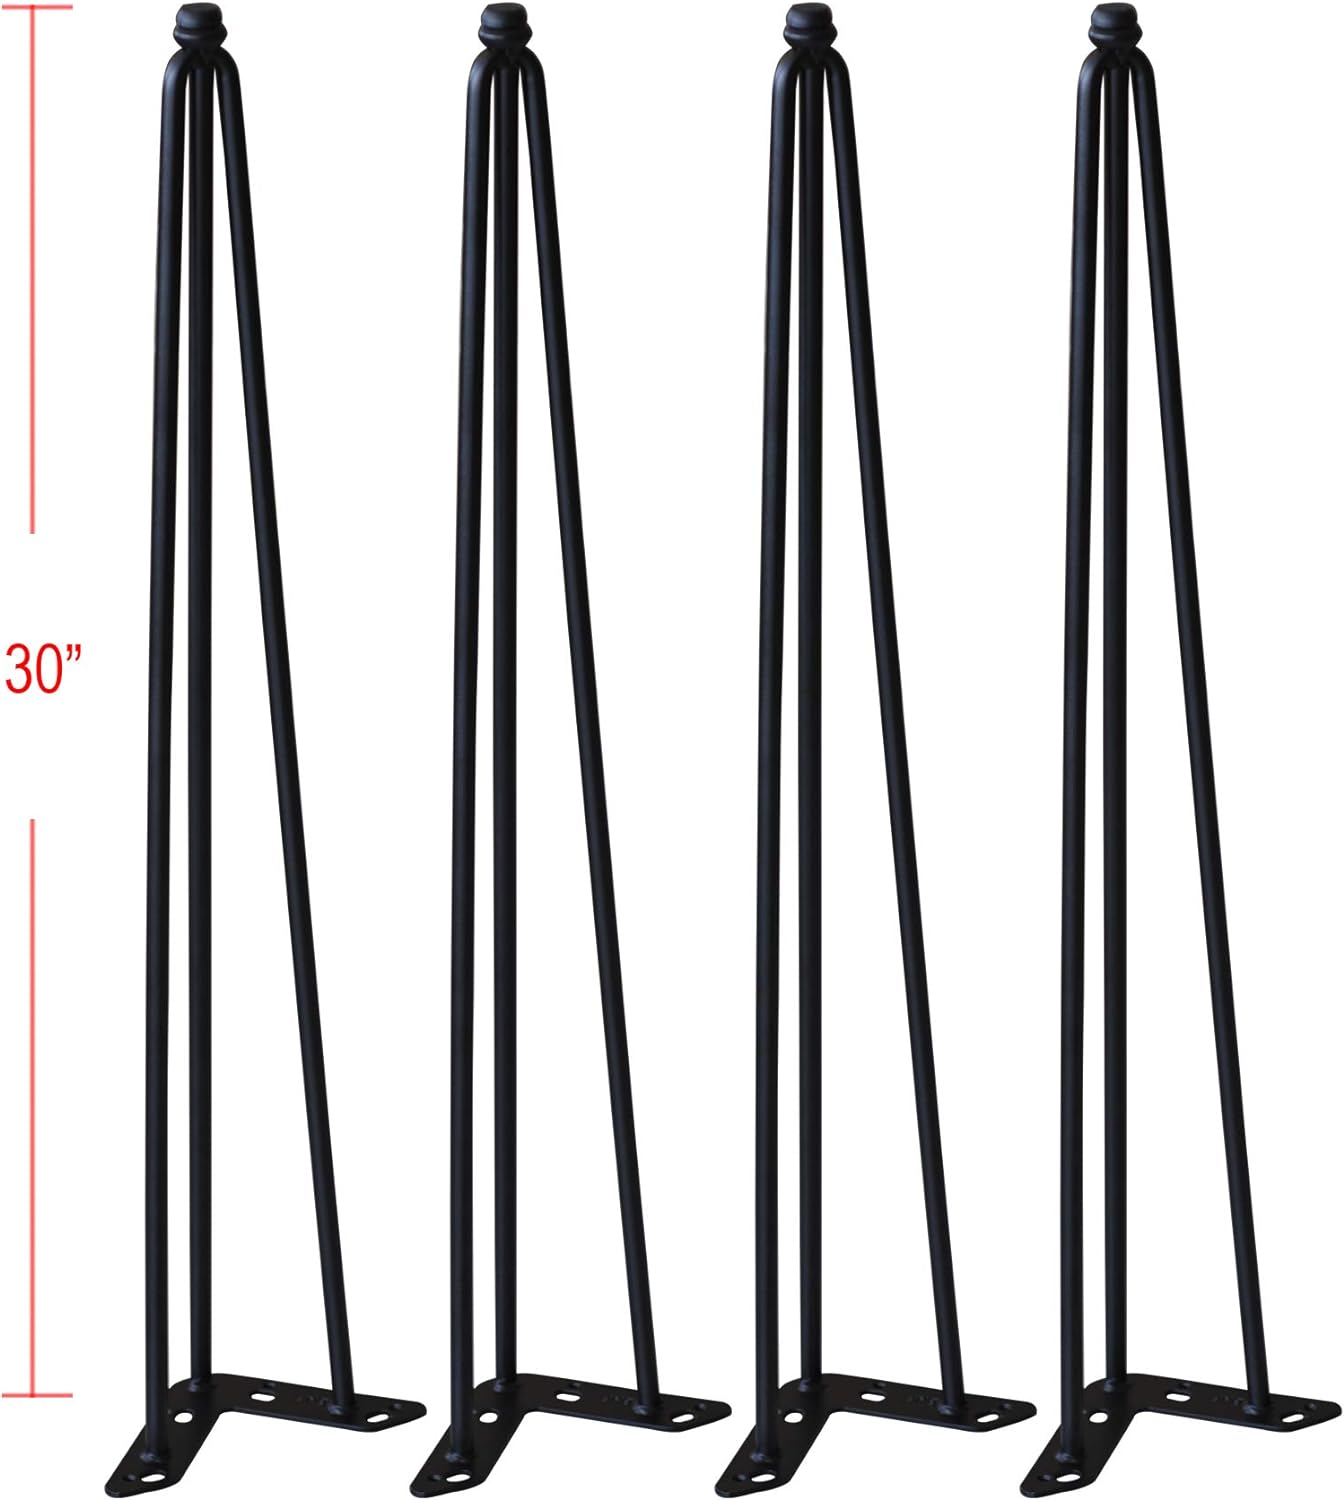 Home Soft Things Hairpin Metal Table Legs 30 Inch Legs for Furniture Coffee Bench Dining End Industrial Table Desk Set of 4 with Screws Adjustab